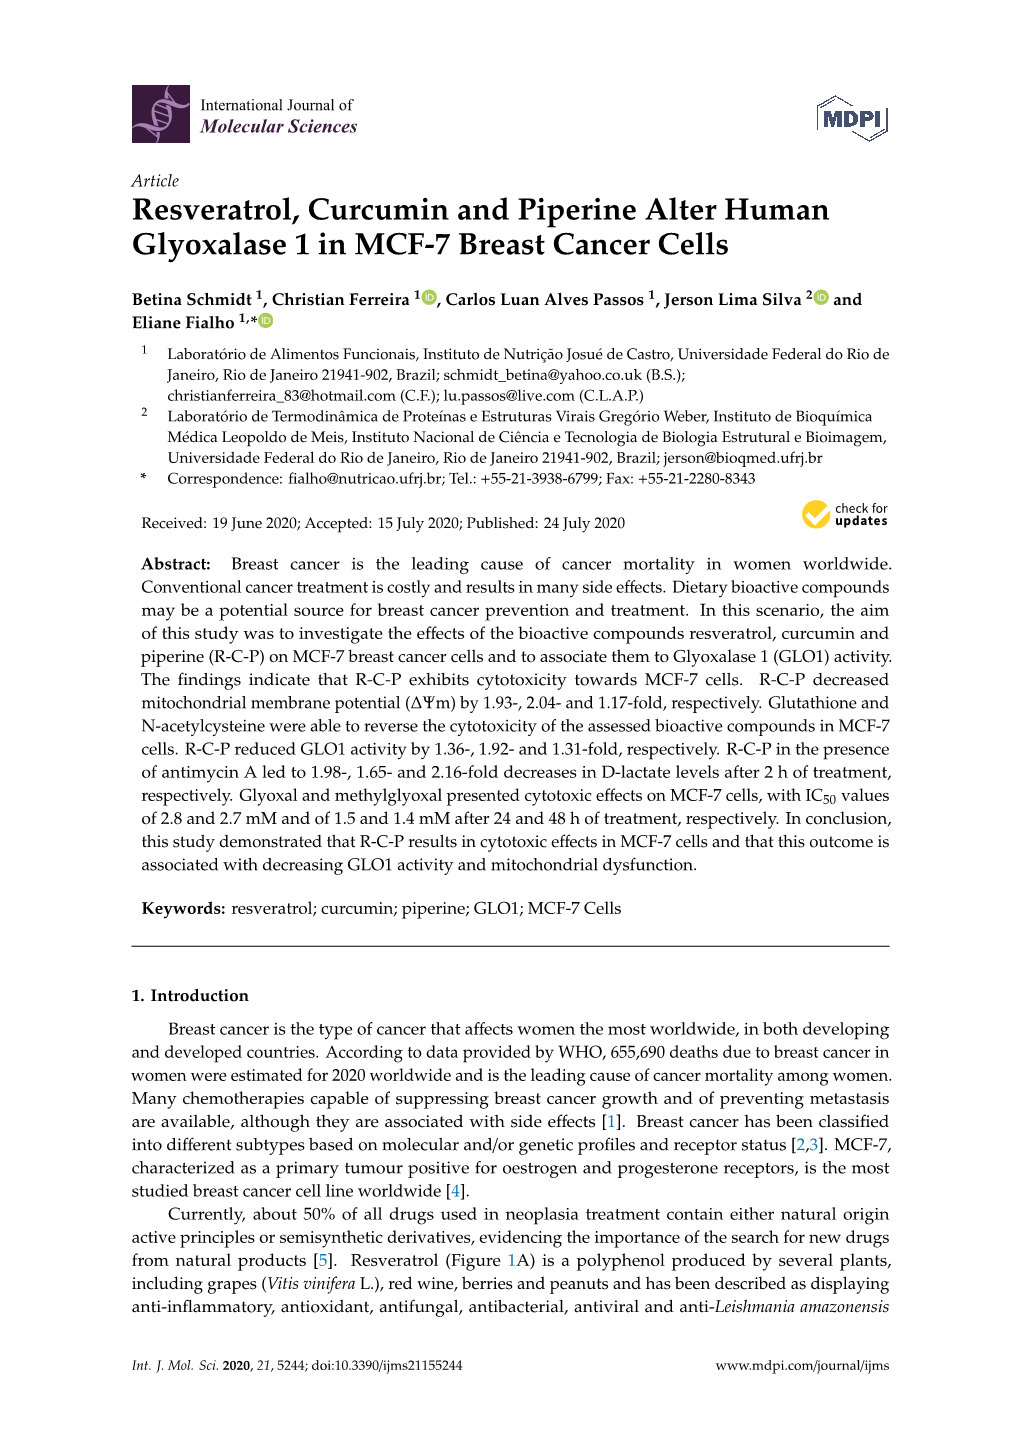 Resveratrol, Curcumin and Piperine Alter Human Glyoxalase 1 in MCF-7 Breast Cancer Cells